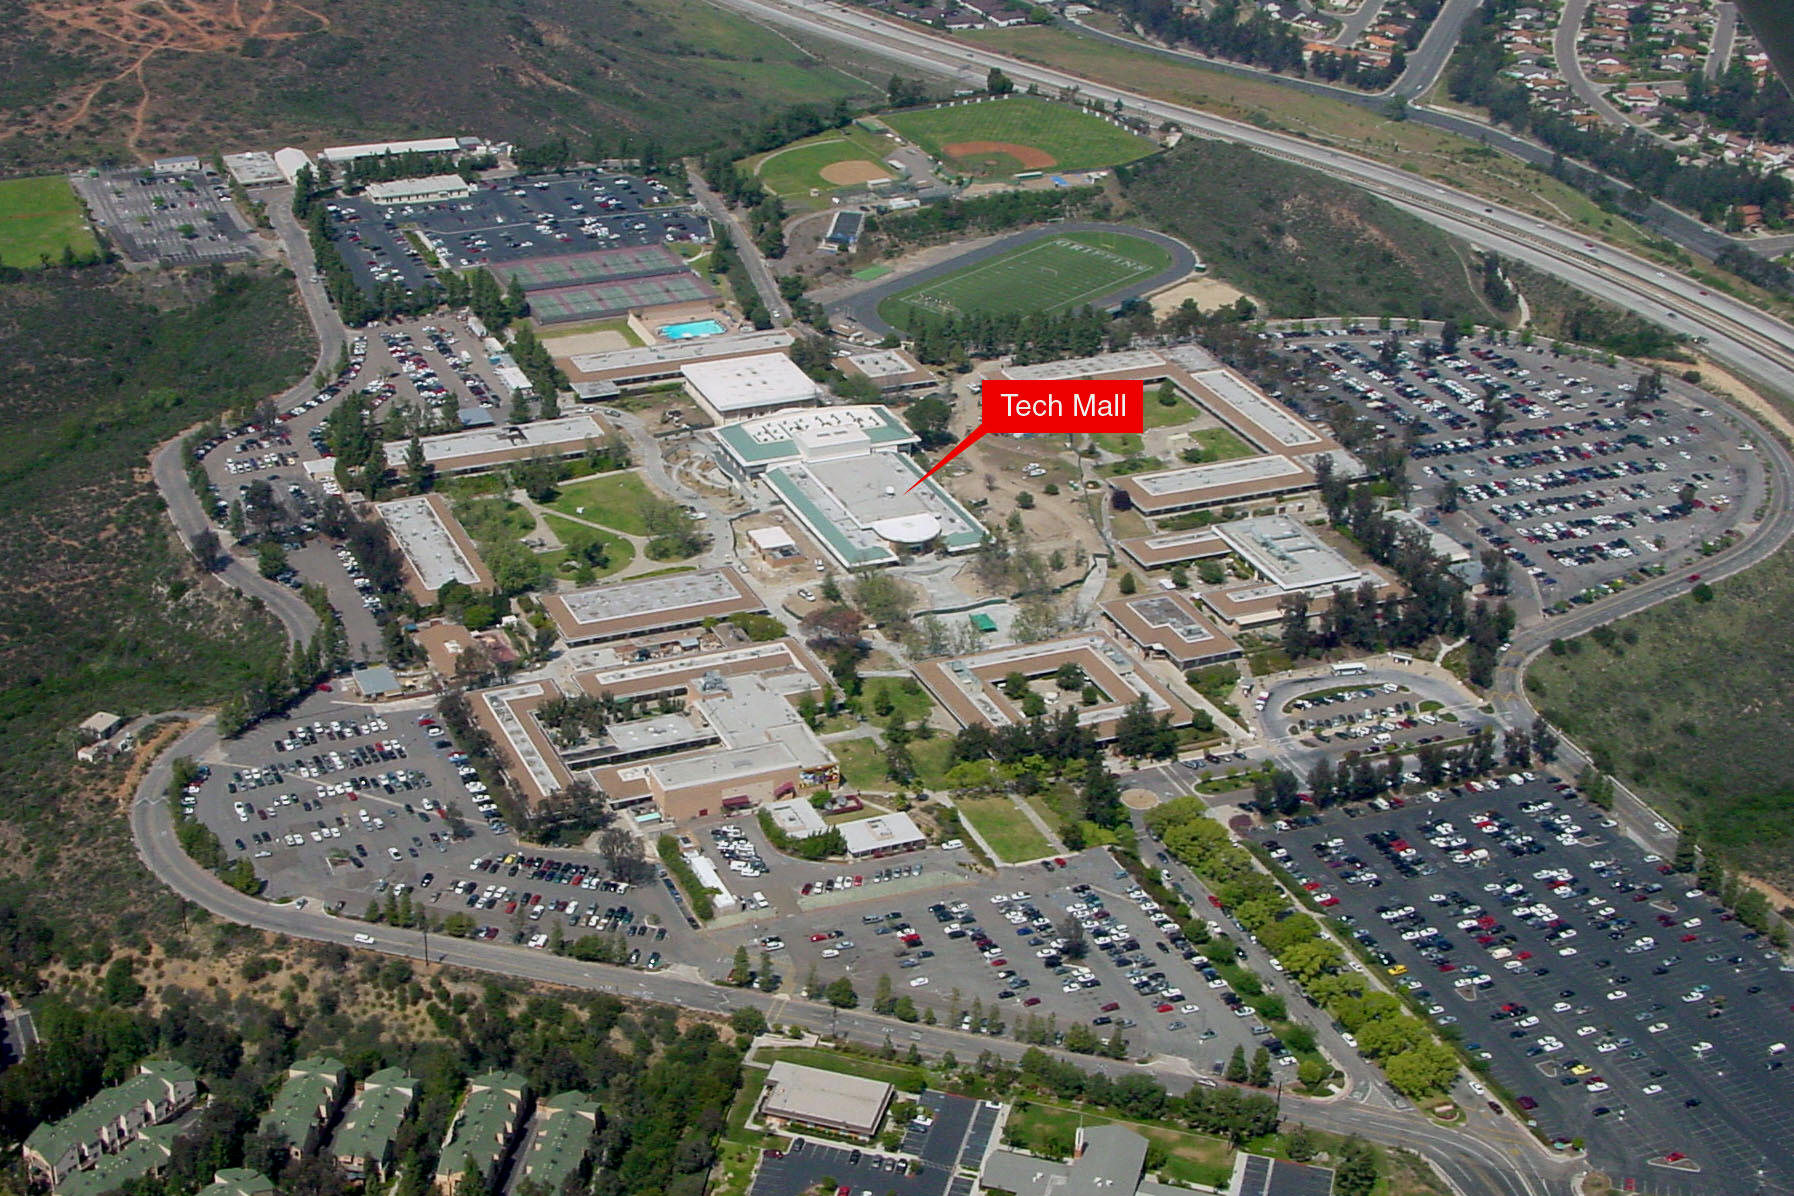 image shows Tech Mall building in middle of campus